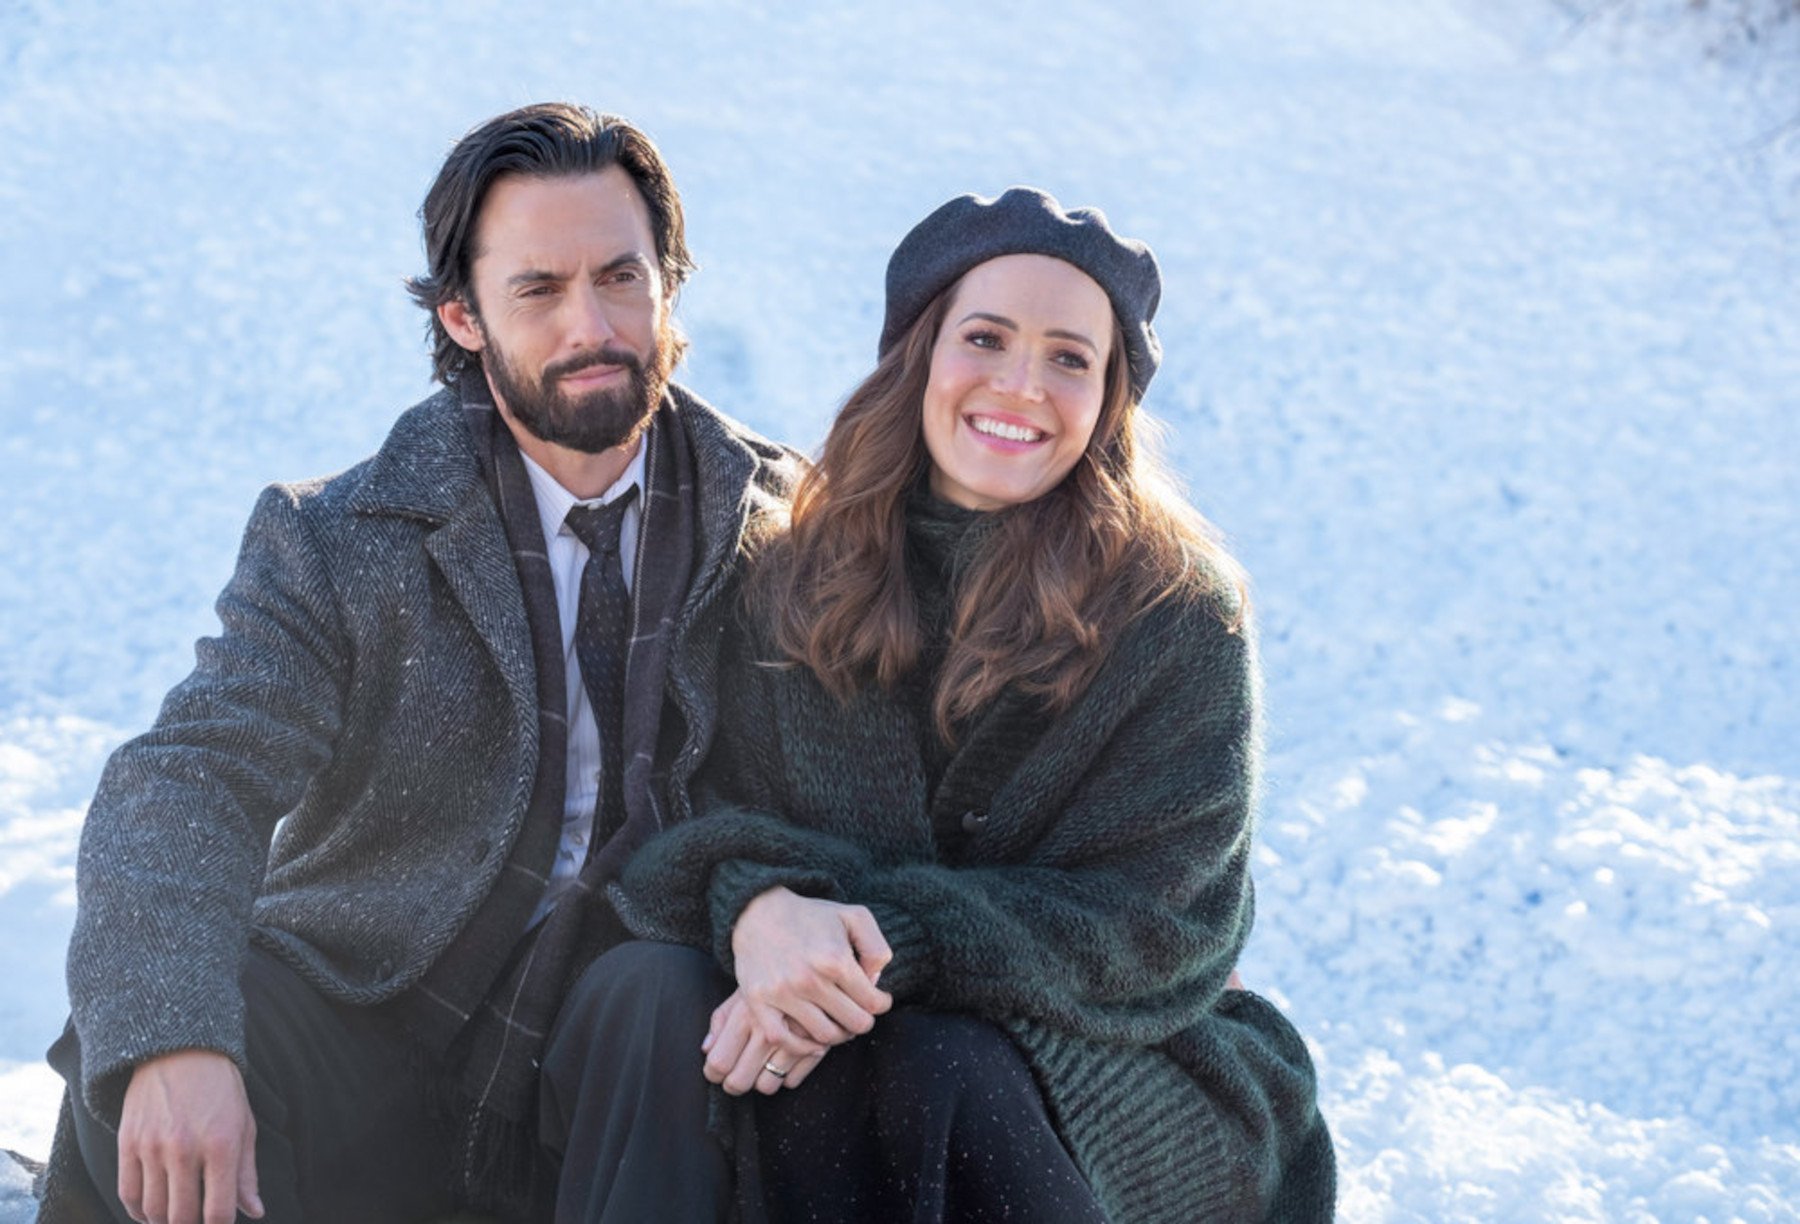 Milo Ventimiglia and Mandy Moore as Jack and Rebecca Pearson in 'This Is Us' Season 6. They're sitting in the snow, wearing coats, and smiling.